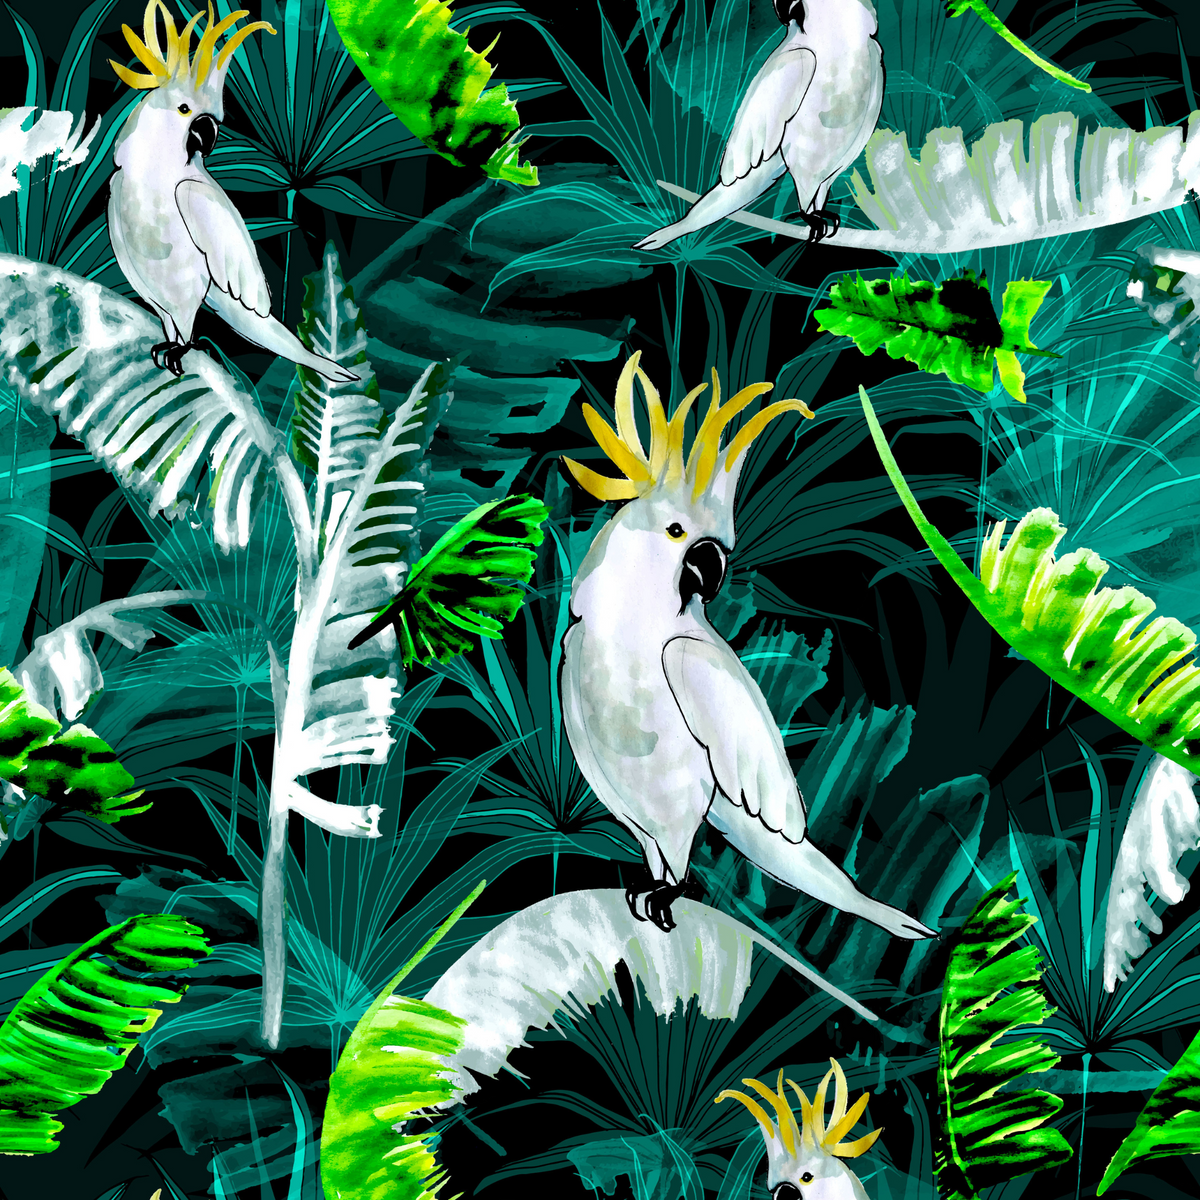 Sand Free Towel pattern of Bird of Paradise showing a White Cockatoo and Australian Native perched on palm leaves